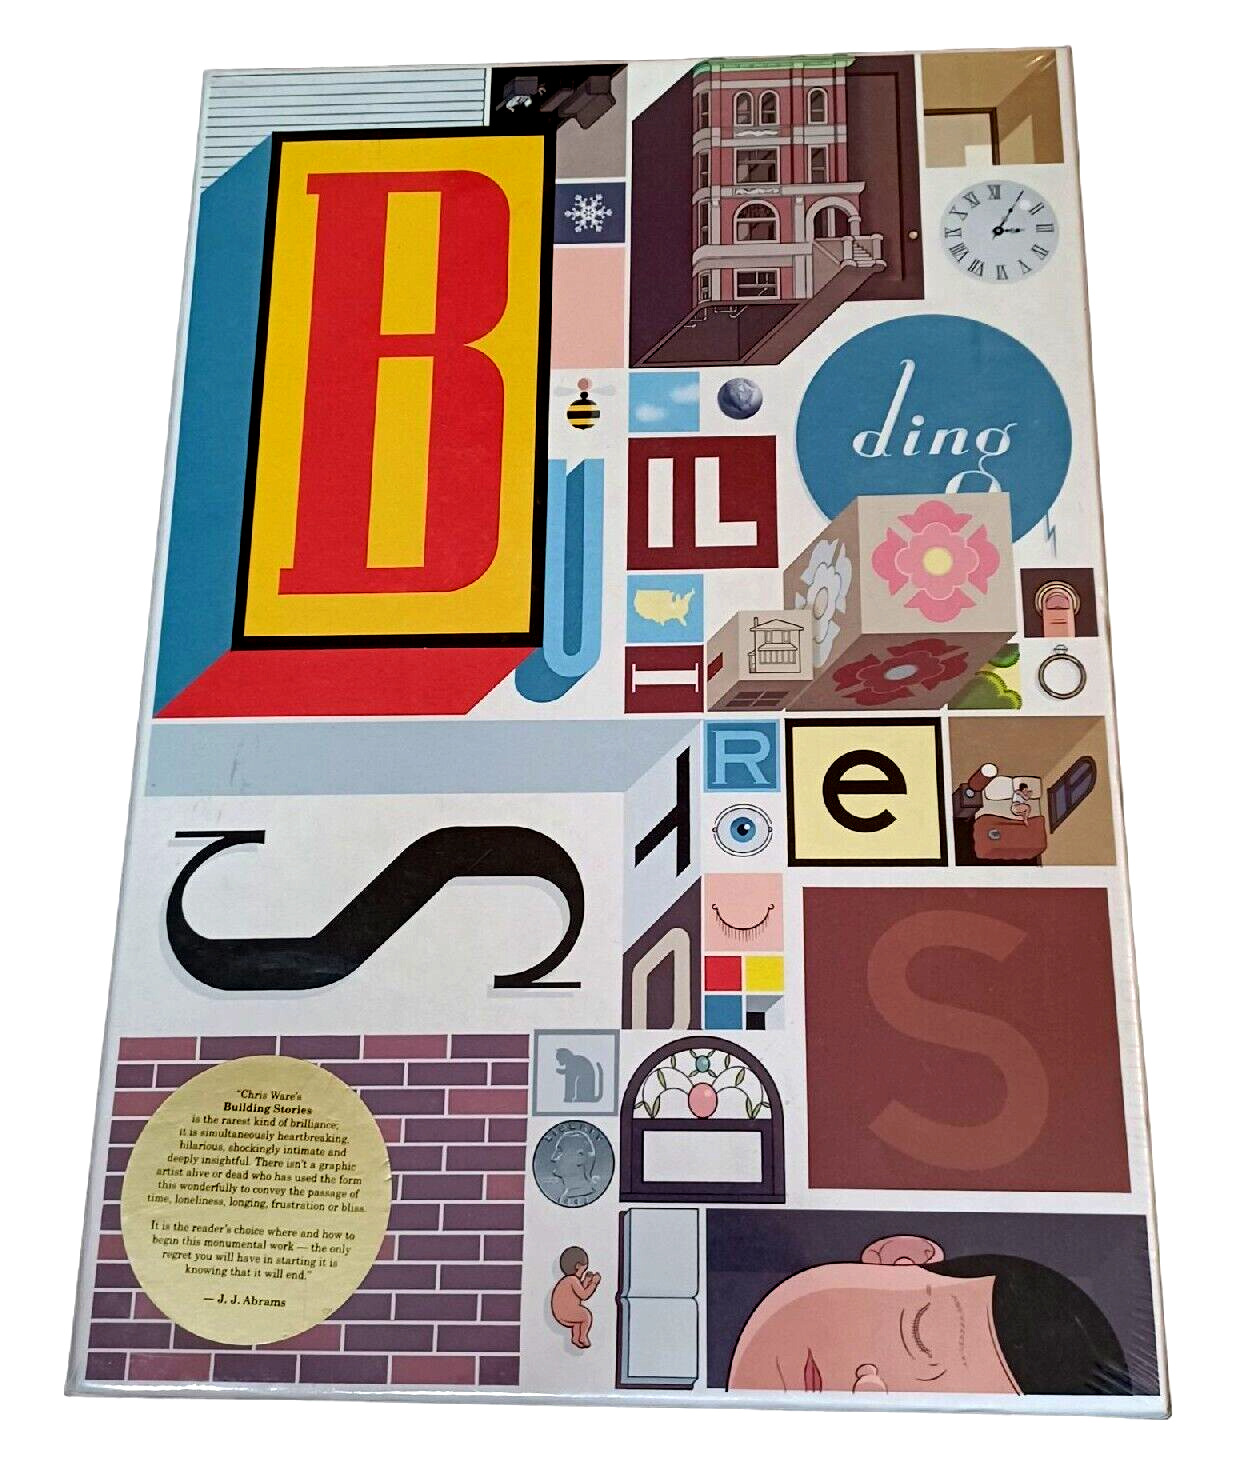 Building Stories, a Graphic Novel in a Box by Chris Ware NEW SEALED